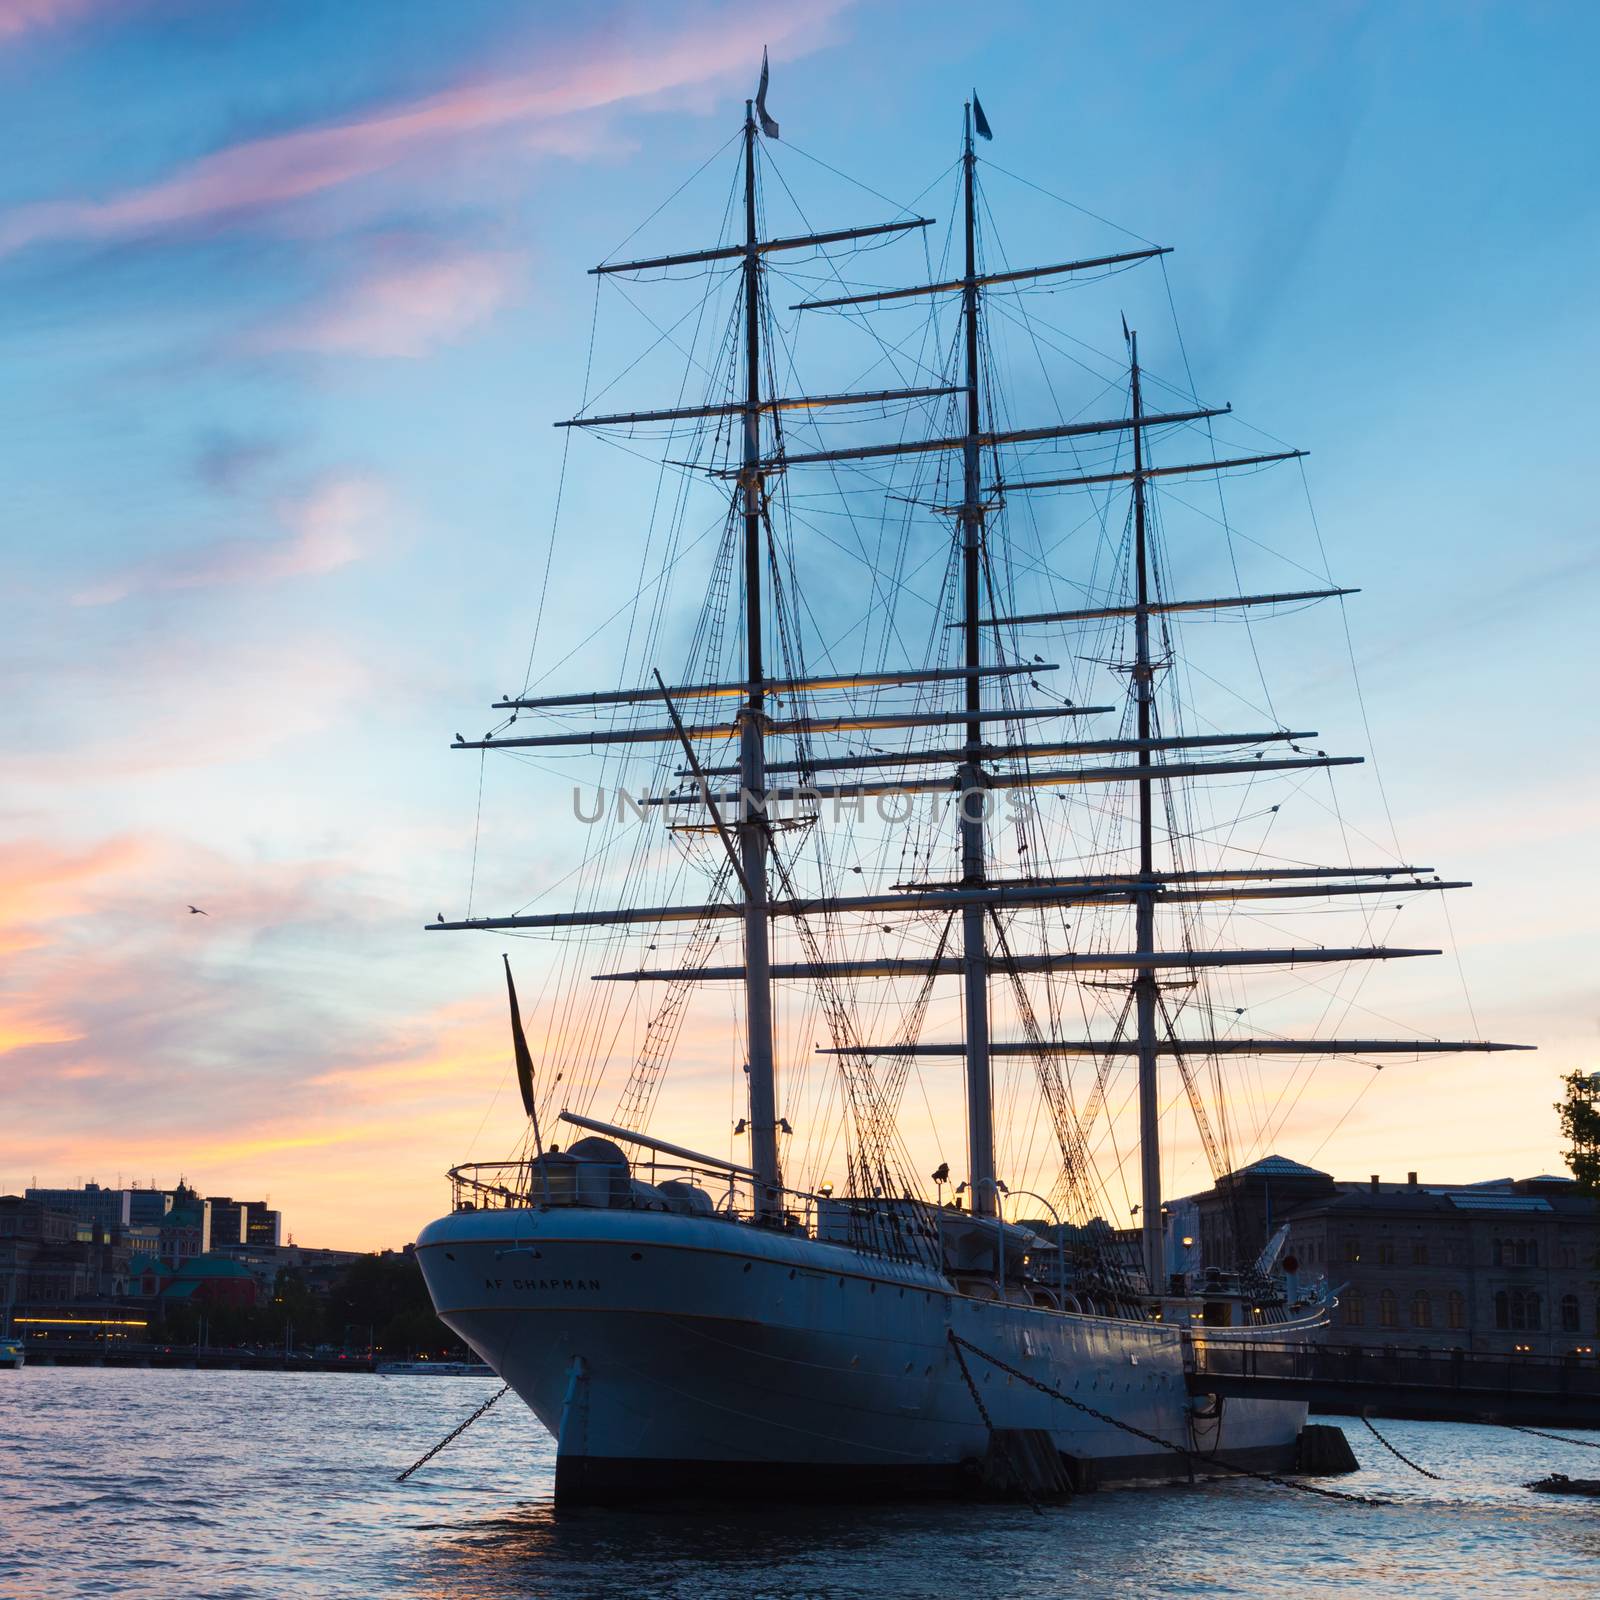 Panoramic view of swedish capital Stockholm in sunset. Silhouette of large traditional wooden sailboat and old medieval downtown of Gamla stan in the background. Copy space. Square composition.